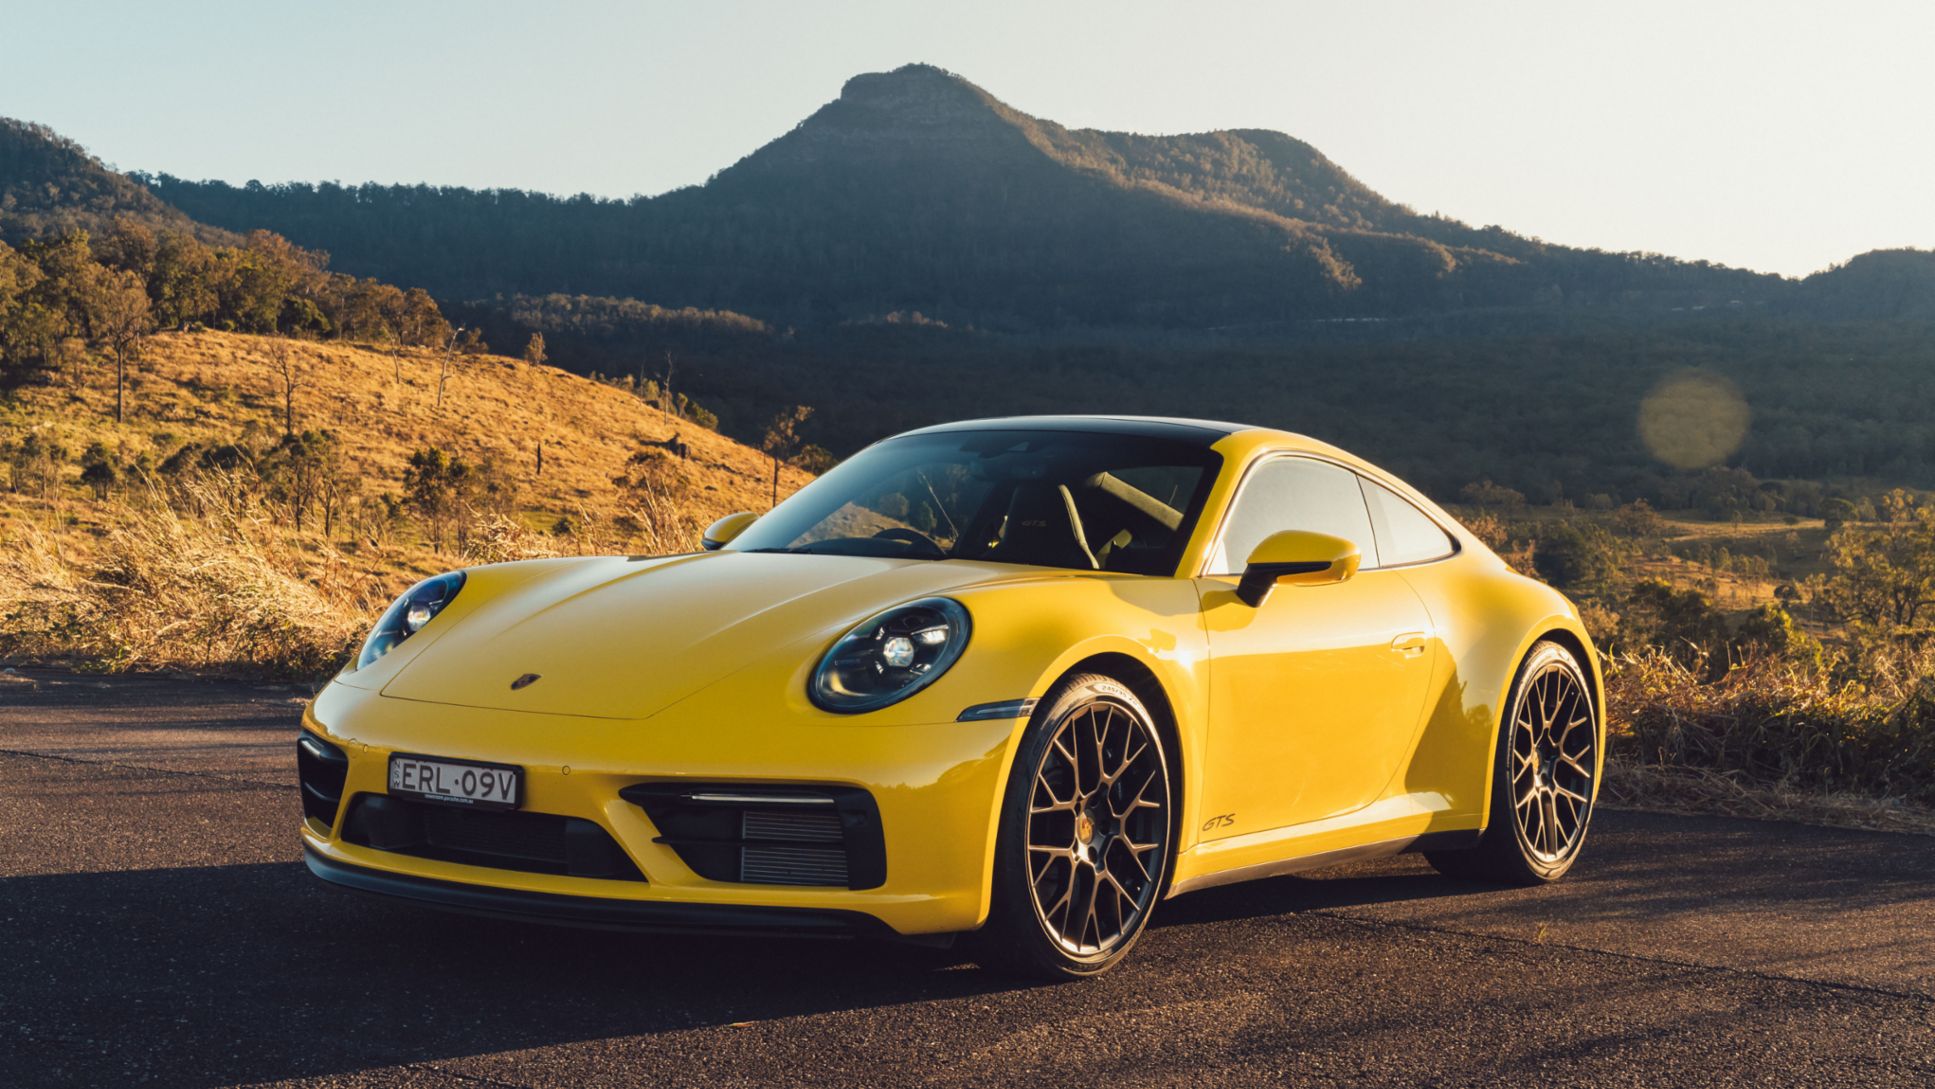 Product Highlights: The Porsche 911 GTS models – More distinctive